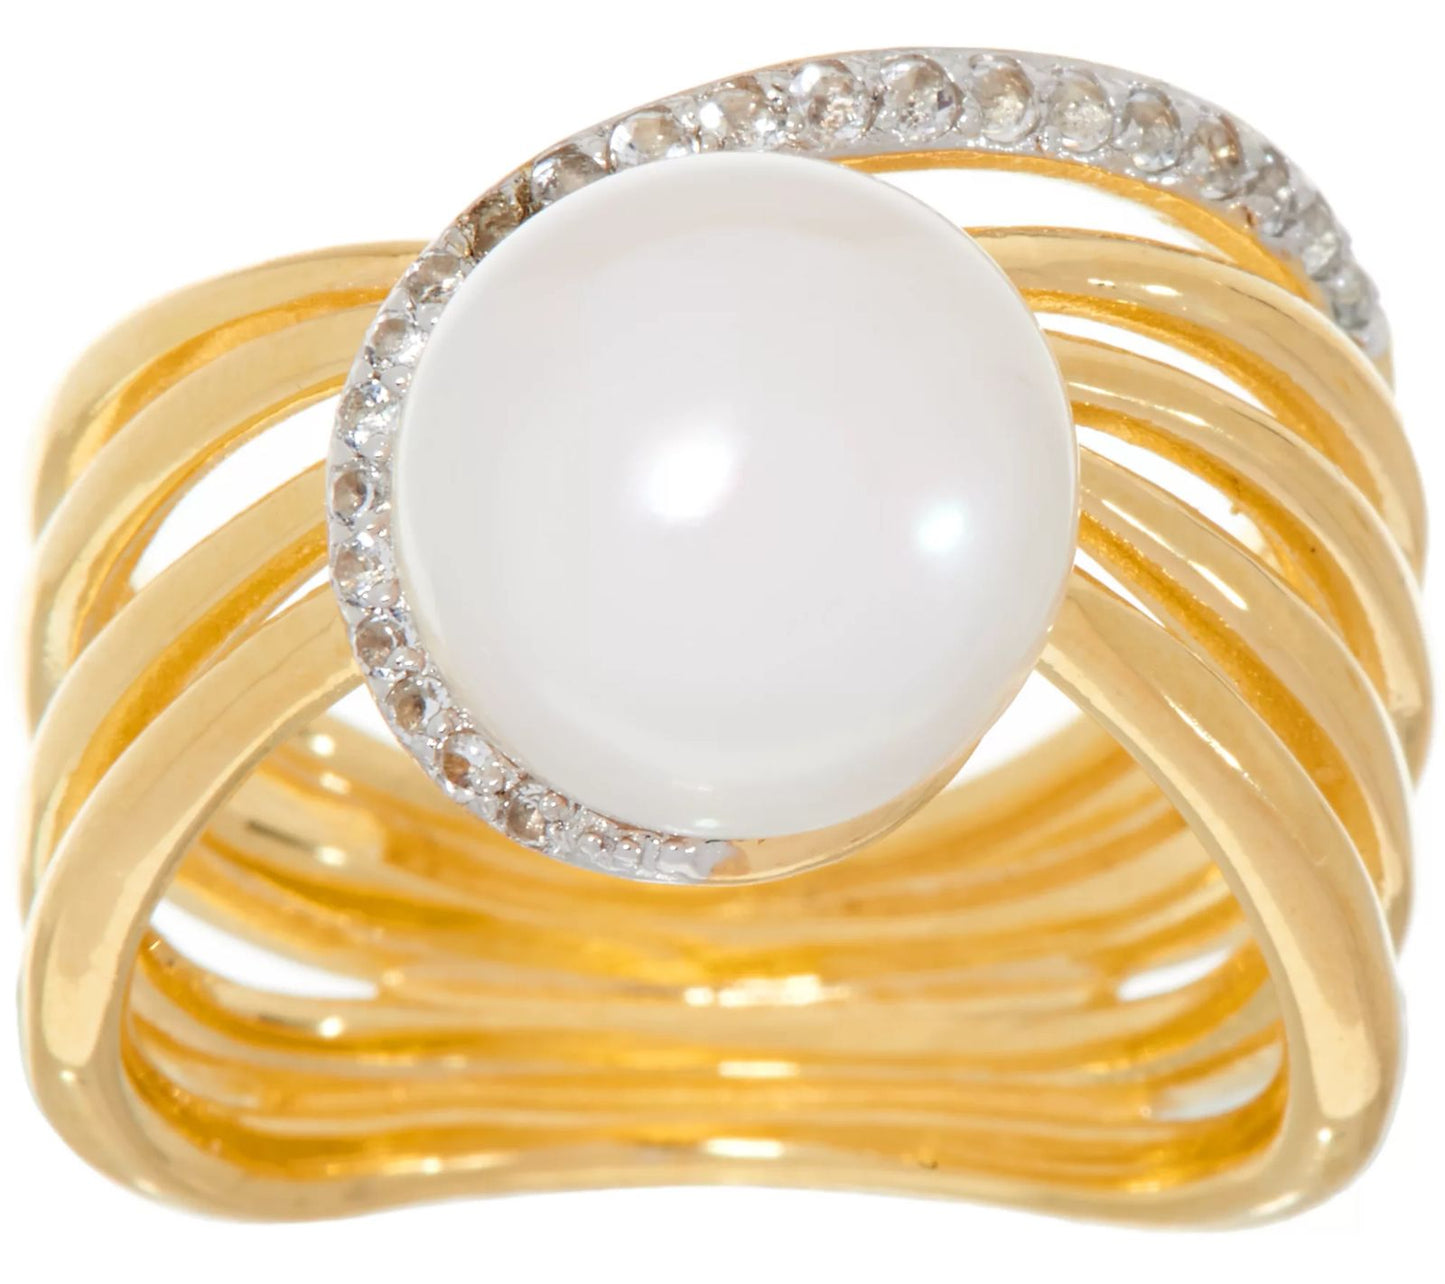 Honora Cultured Pearl, White Topaz Swirl Yellow Band Ring Size 8 Sterling Silver